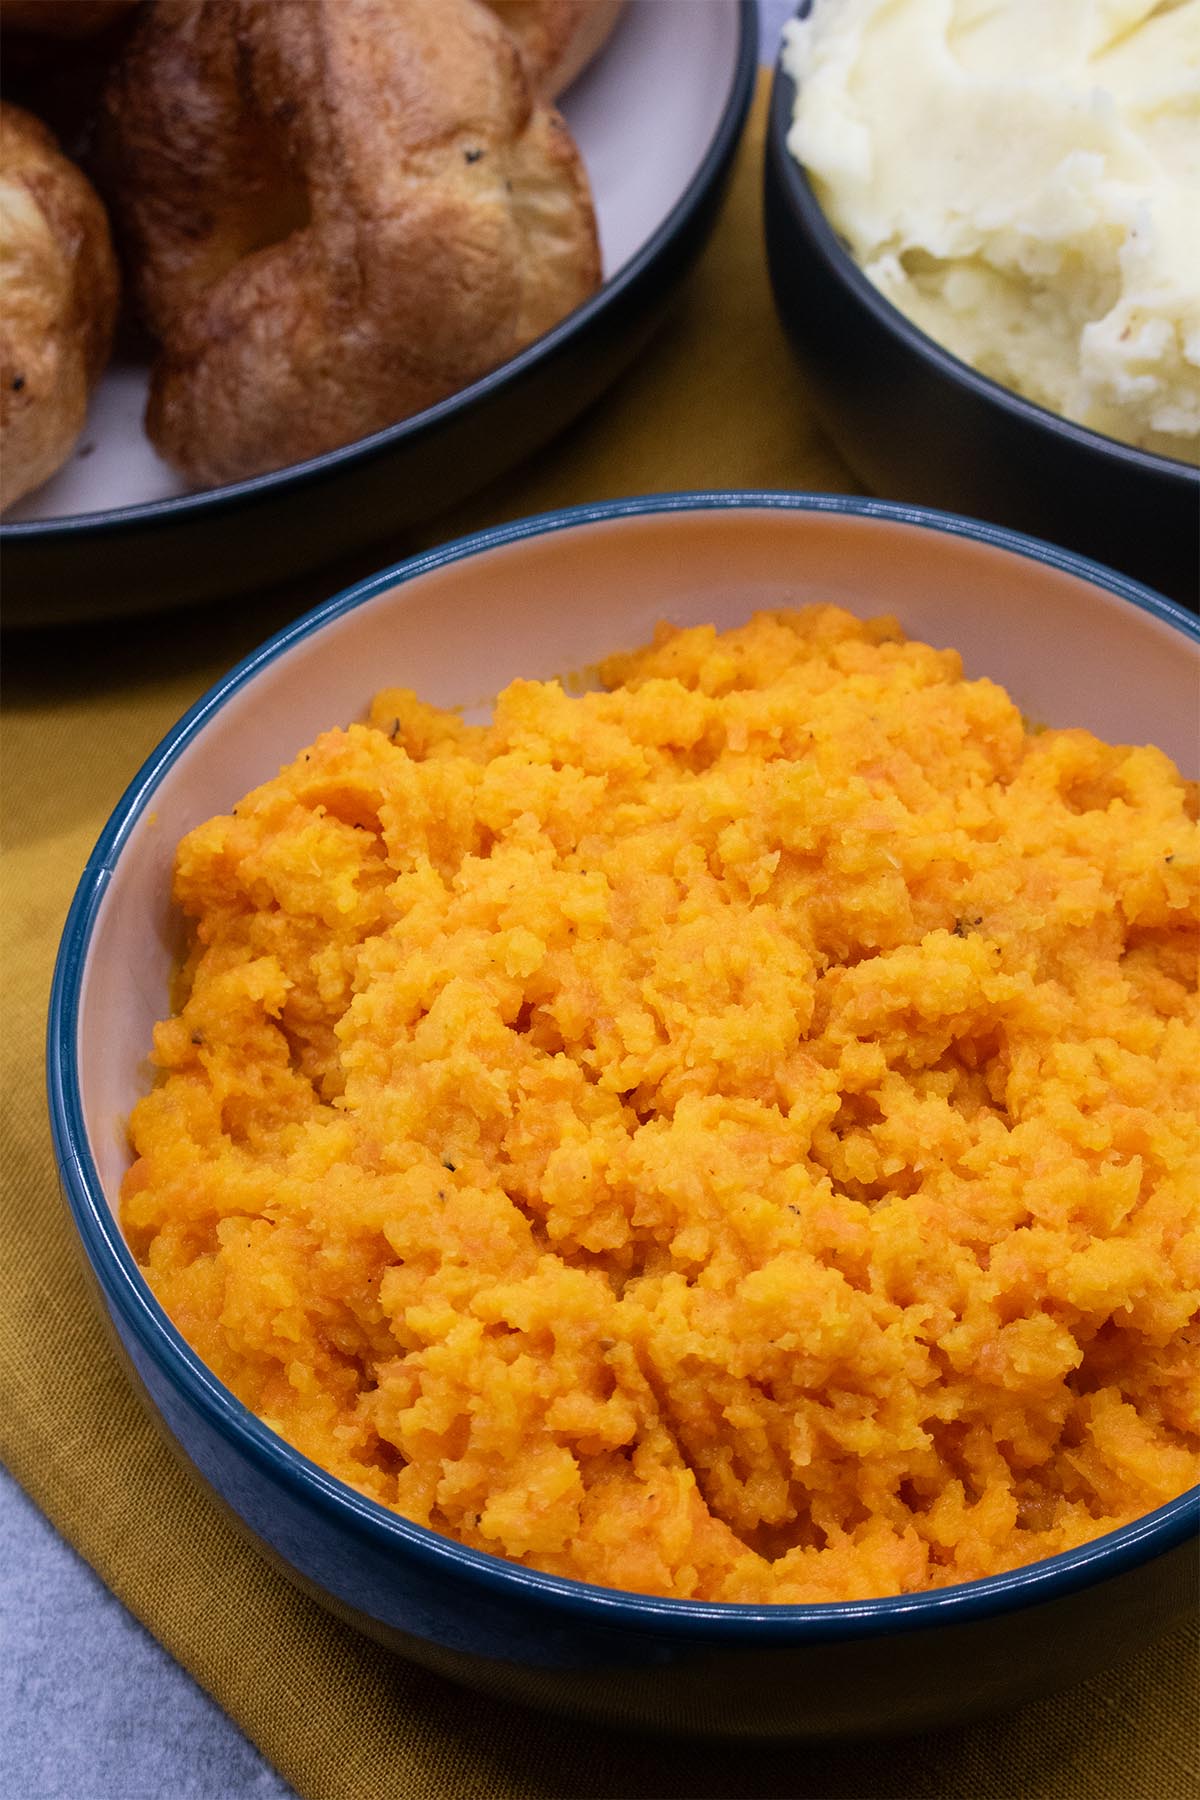 carrot and swede mash, mashed potatoes and yorkshire puddings in bowls with orange napkin